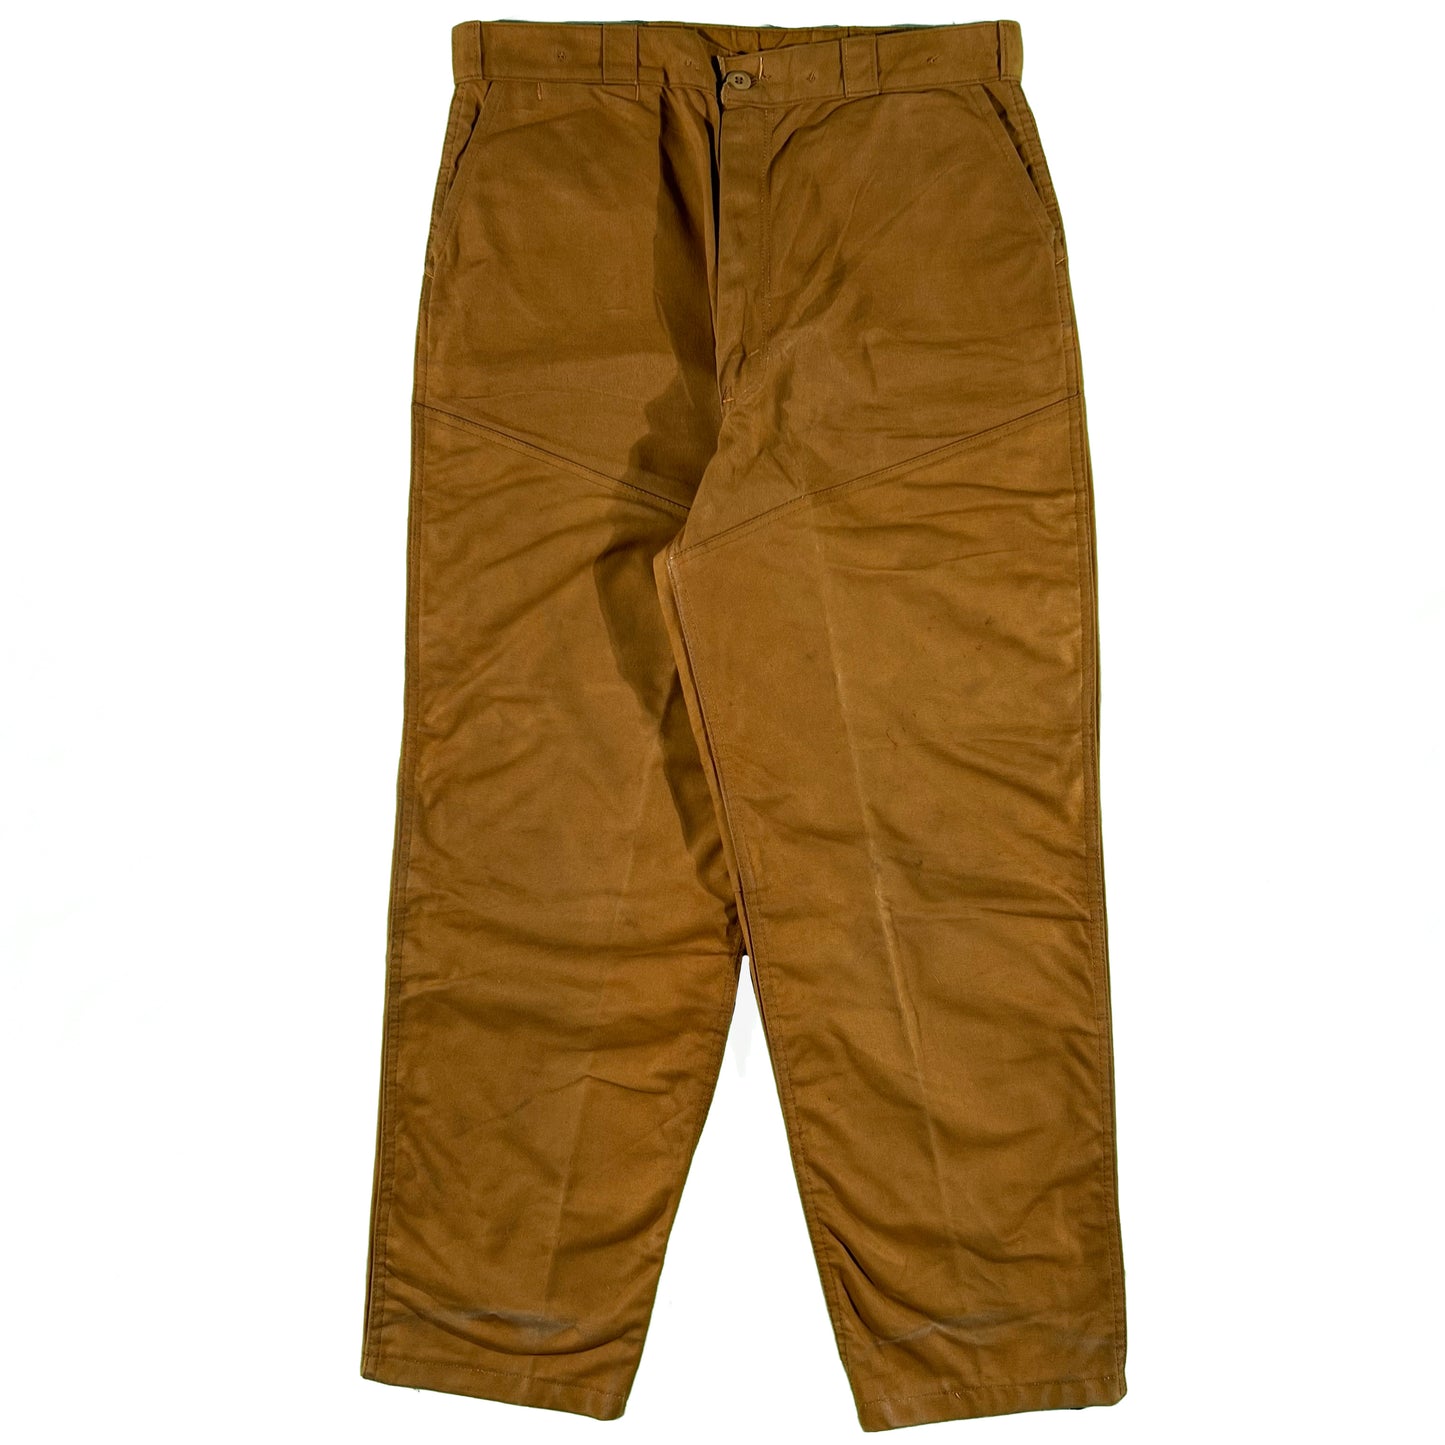 60s Penneys Foremest Canvas Hunting Pants- 32x30